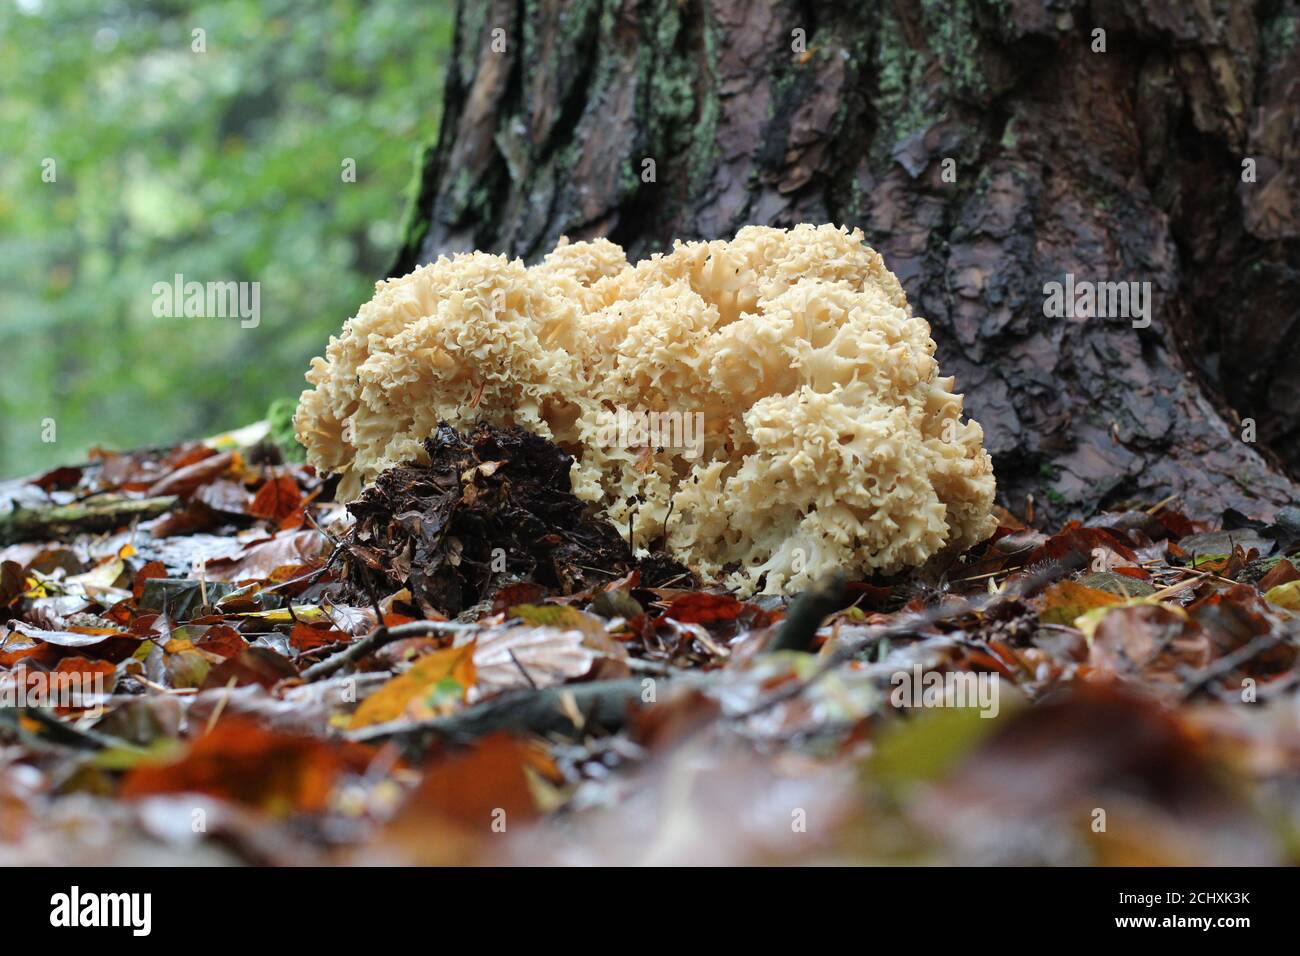 Closeup shot of Coral mushroom in the forest Stock Photo